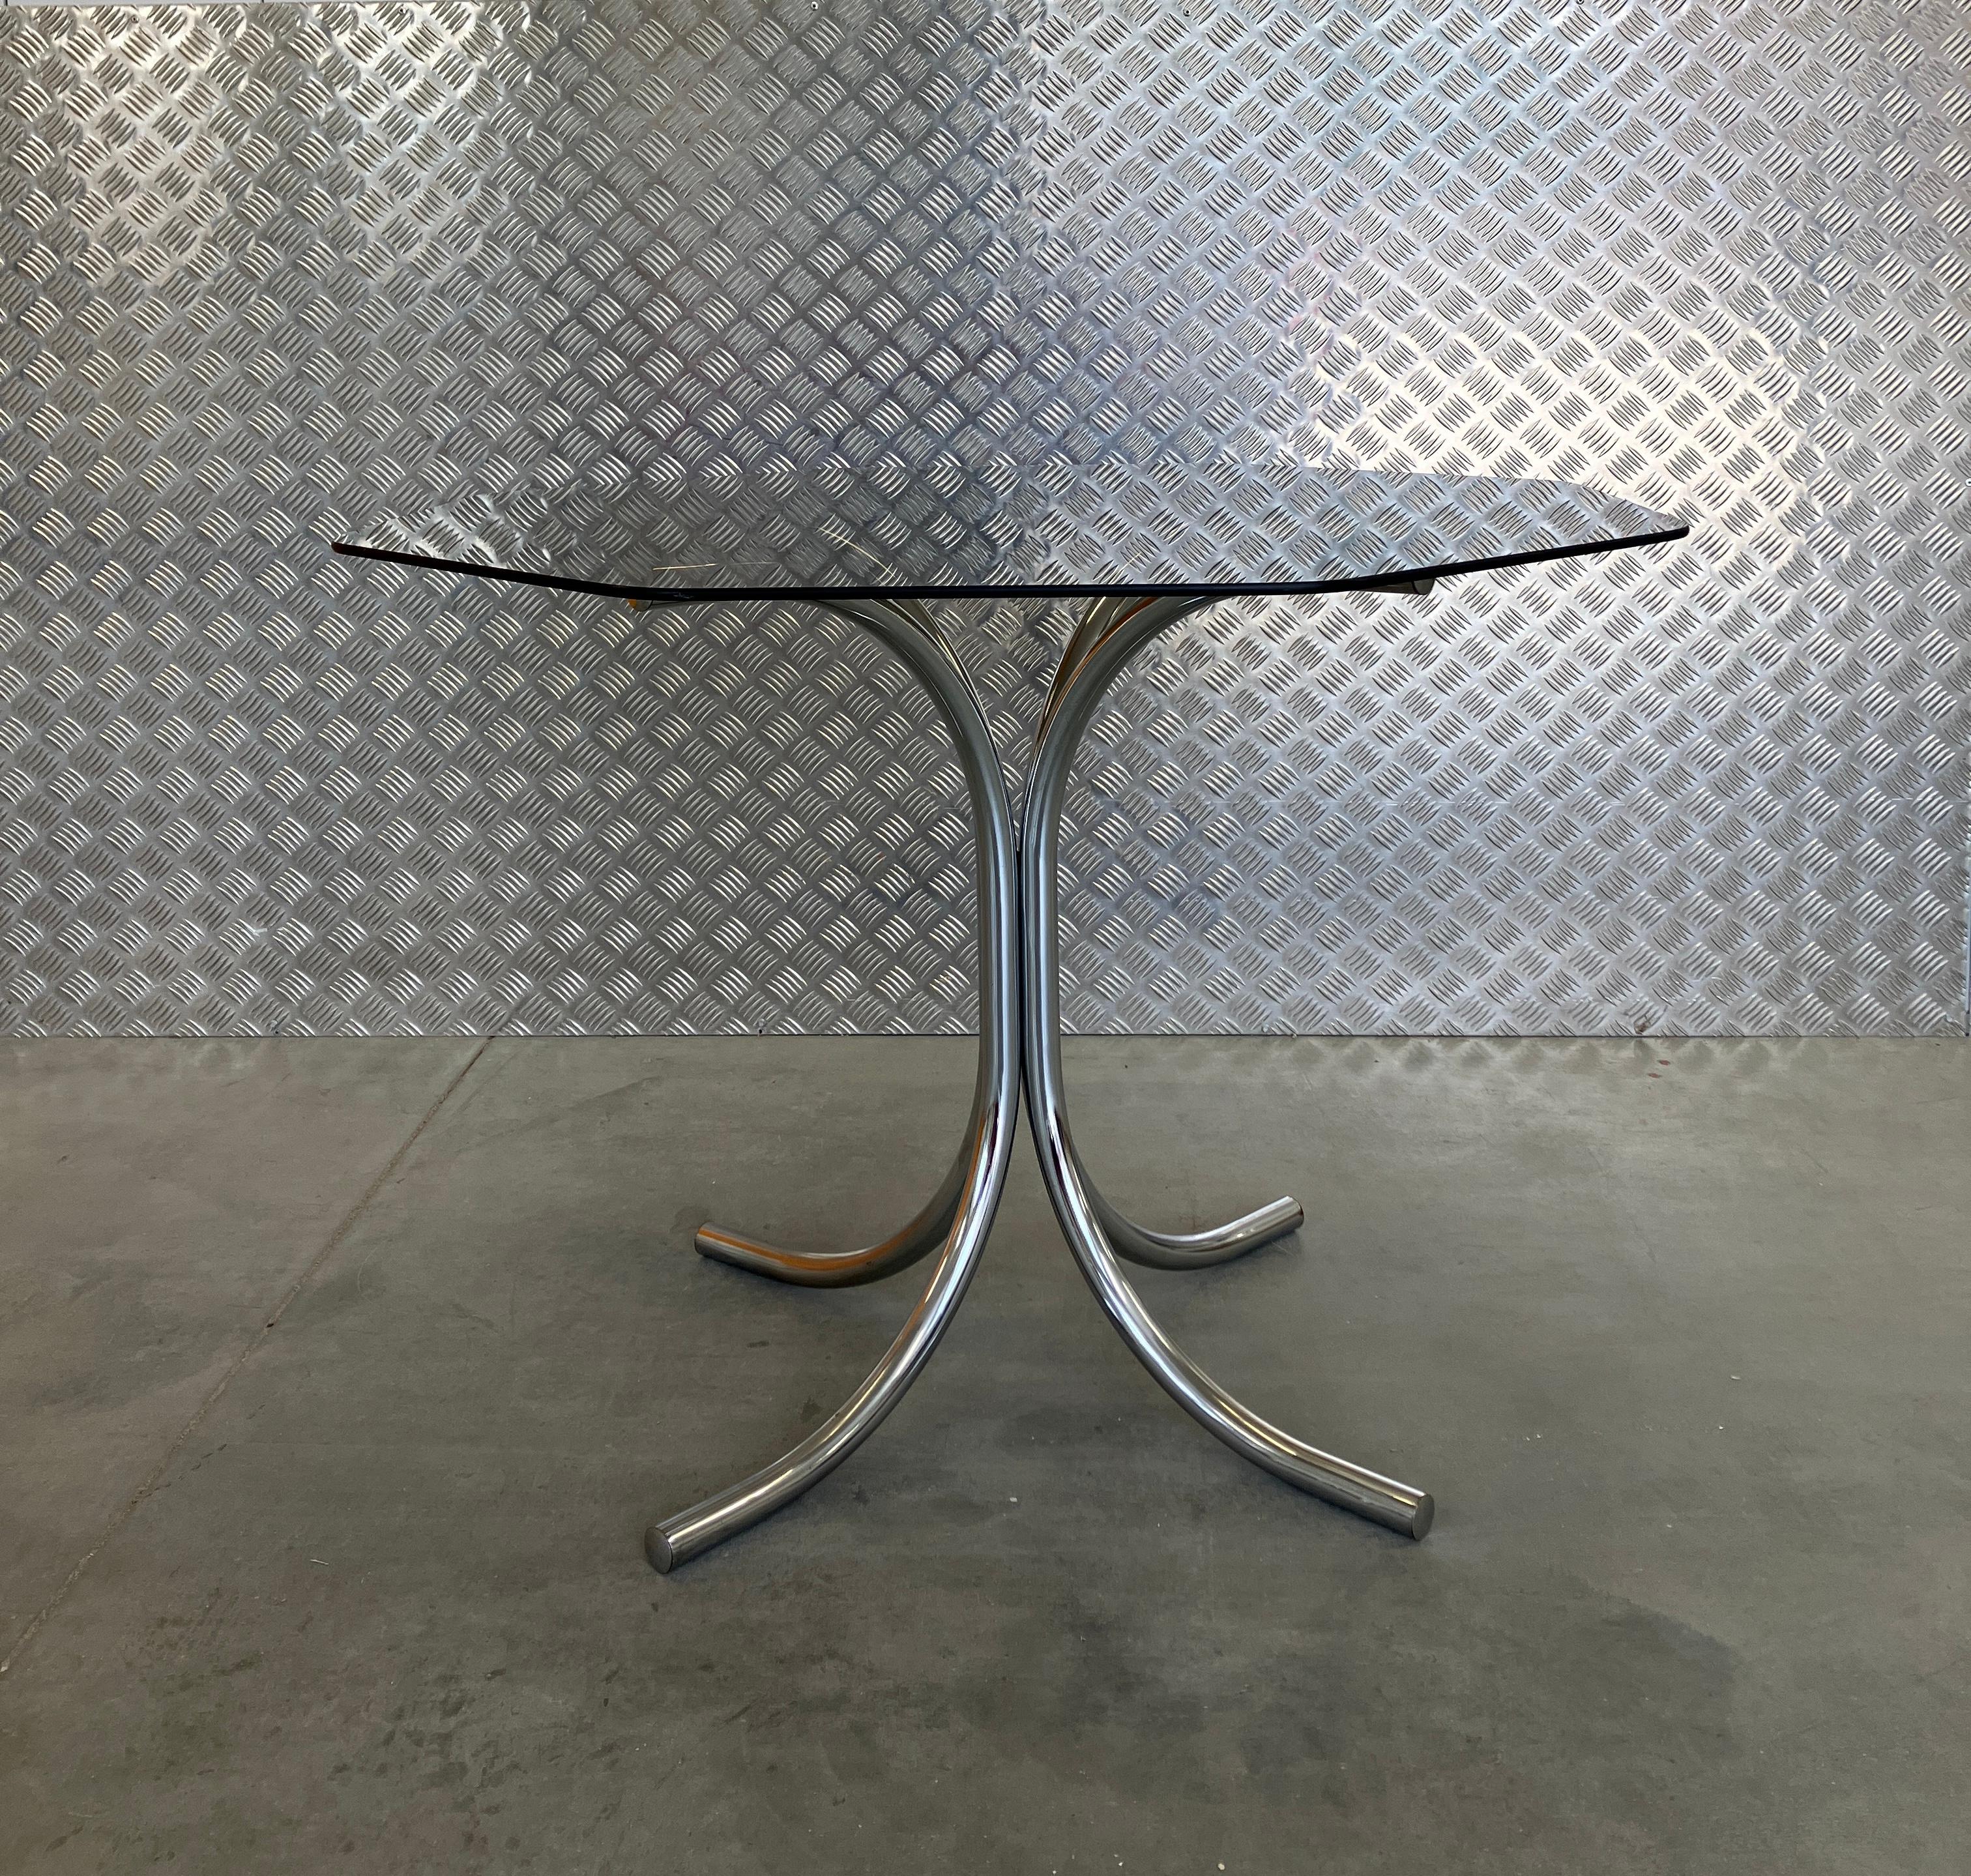 A stylish 1970s mid-century modern dining table with a hexagonal-shaped smoked glass table top on chrome pedestal legs.

The elegant Bauhaus-influenced hexagonal dining table with a glamorous smoked glass top is set upon a chrome pedestal. The